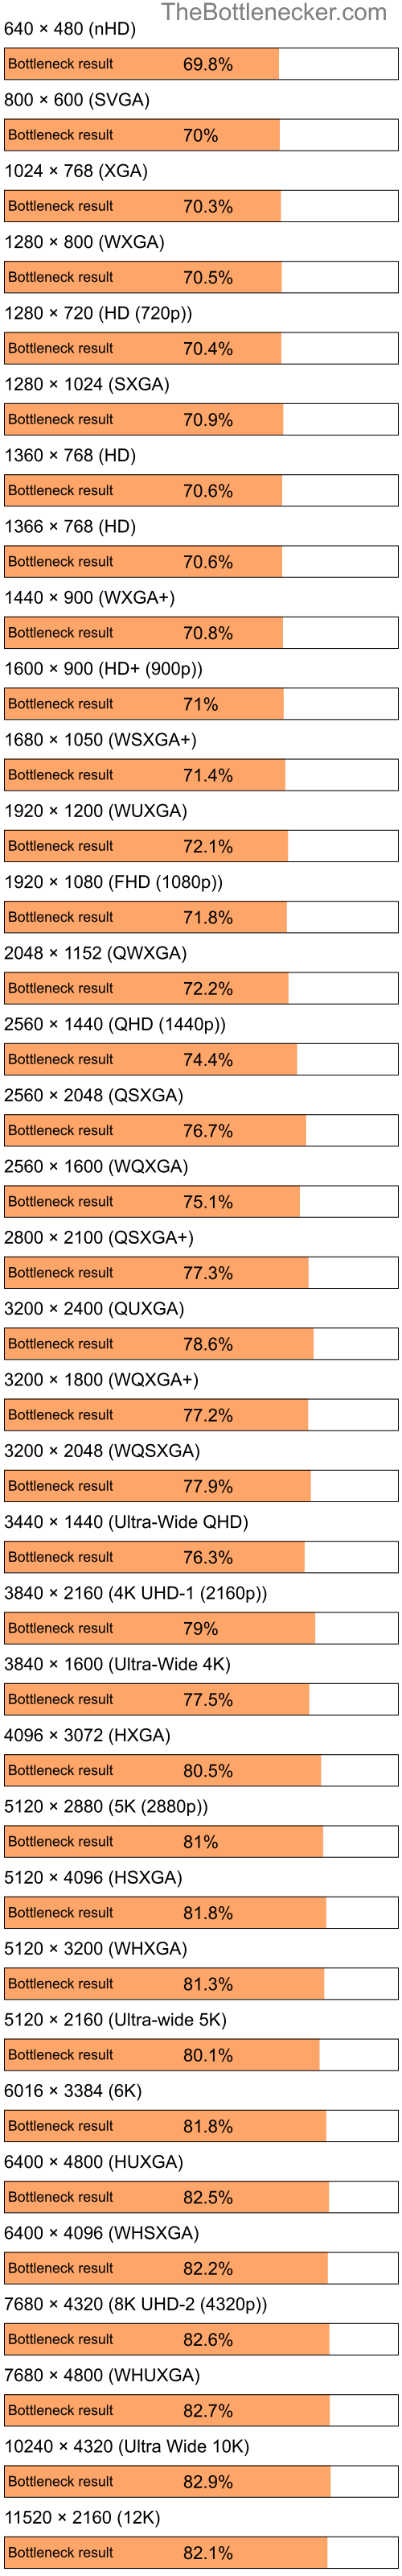 Bottleneck results by resolution for Intel Pentium 4 and Intel G33 in General Tasks